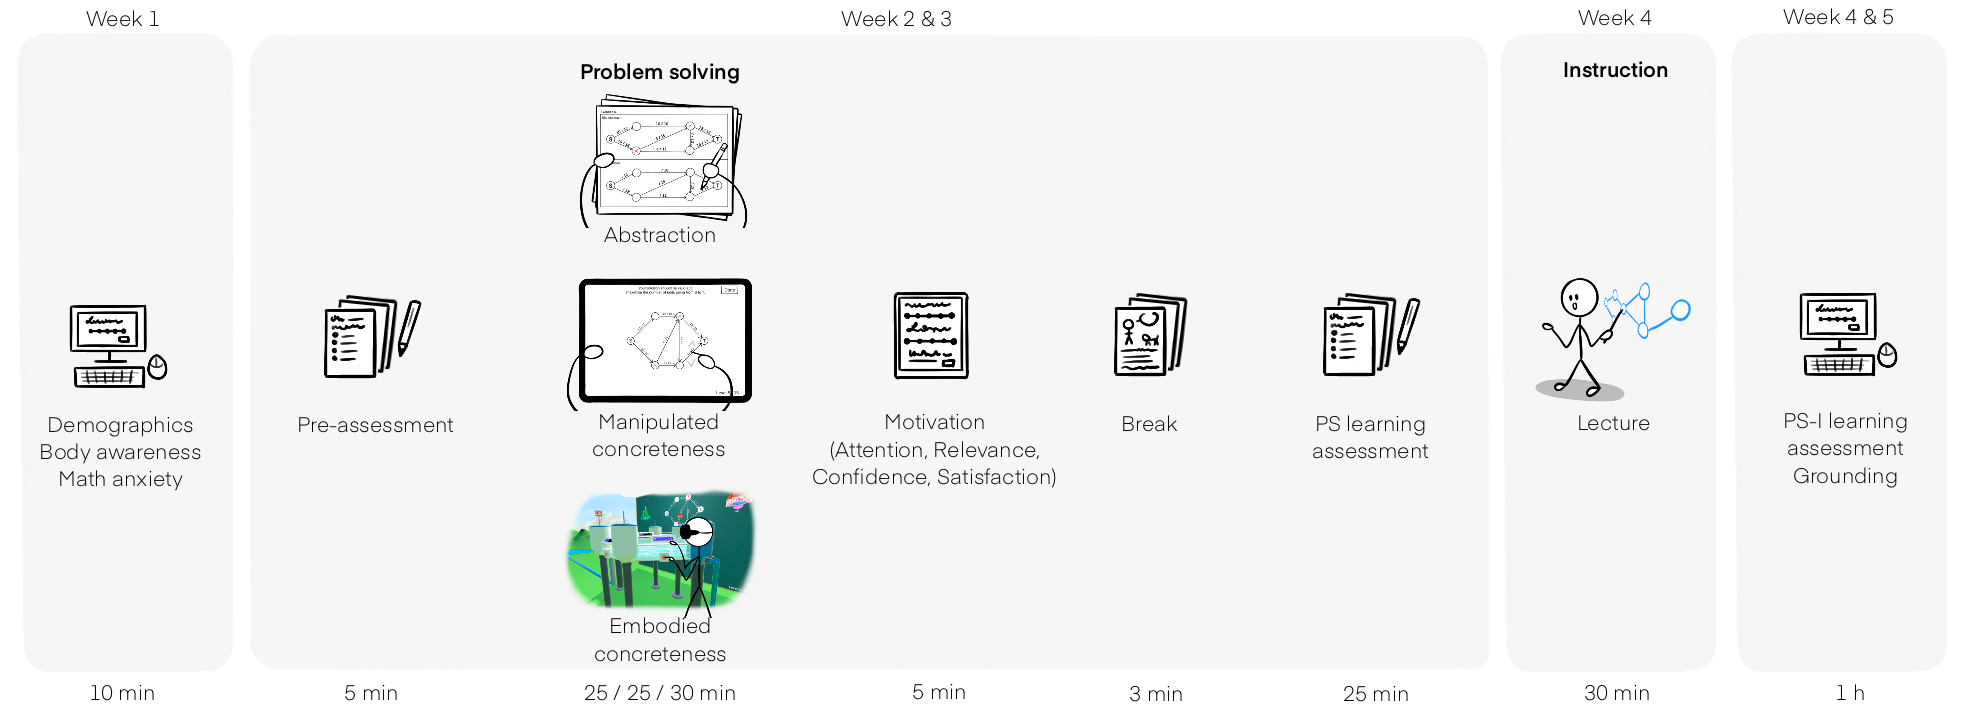 The figure contains 4 areas. The first area in the Week 1 and contains the demographics, body awareness, and math anxiety questionnaires and a duration of 10 minutes. The second area in week 2 and 3 contains a pre-assessment, the problem solving intervention on paper, tablet, or VR, a motivation questionnaire, a break, and a learning assessment and a total duration of about 70 minutes. The third area in week 4 contains the lecture and a duration of 30 minutes. The final column in weeks 4 and 5 contains a learning assessment and a duration of 1h.